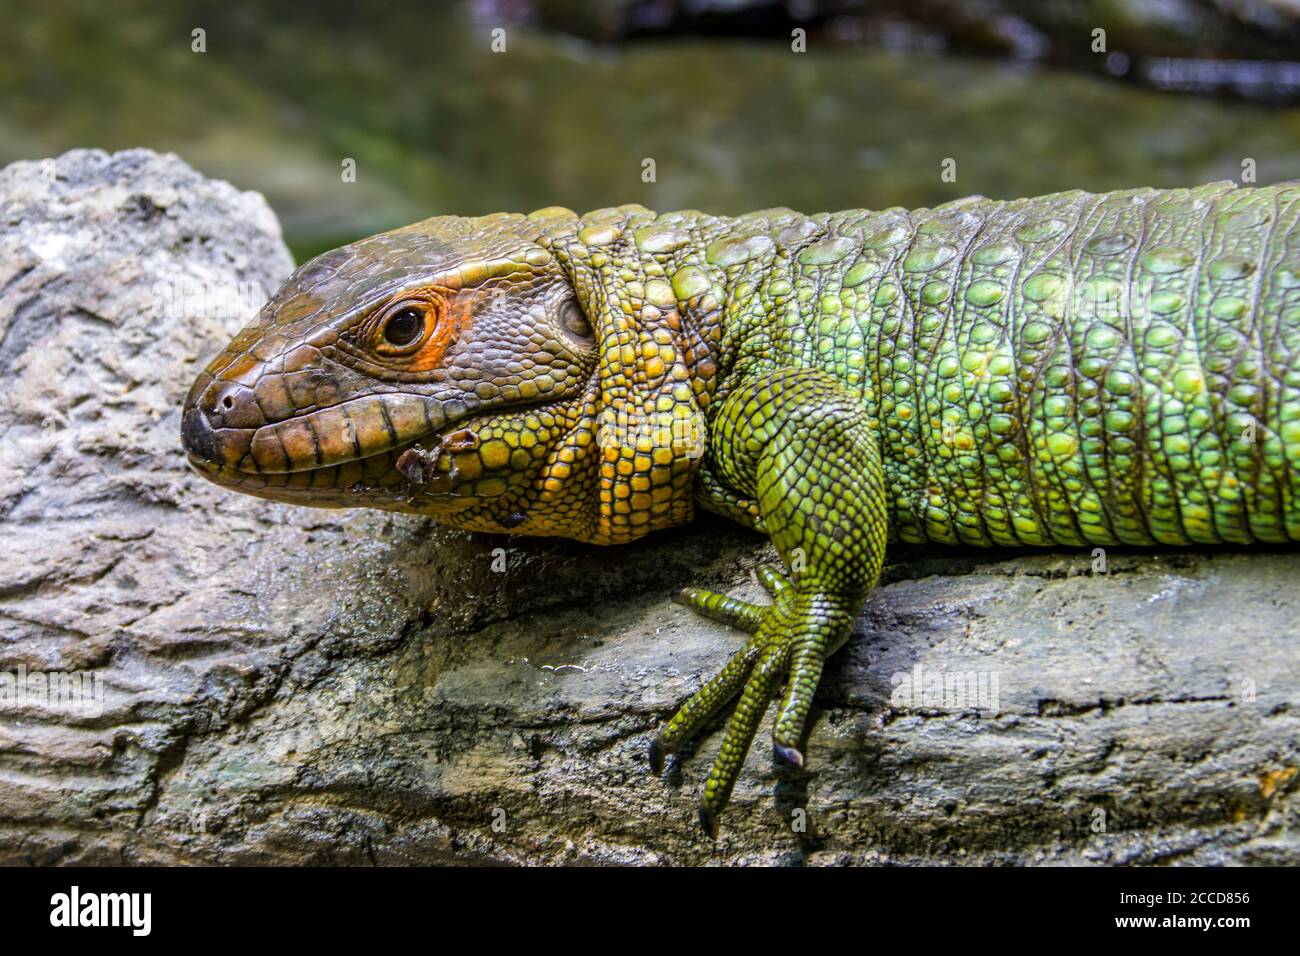 The Northern caiman lizard lies on the trunk.  It is a species of lizard found in northern South America. Stock Photo